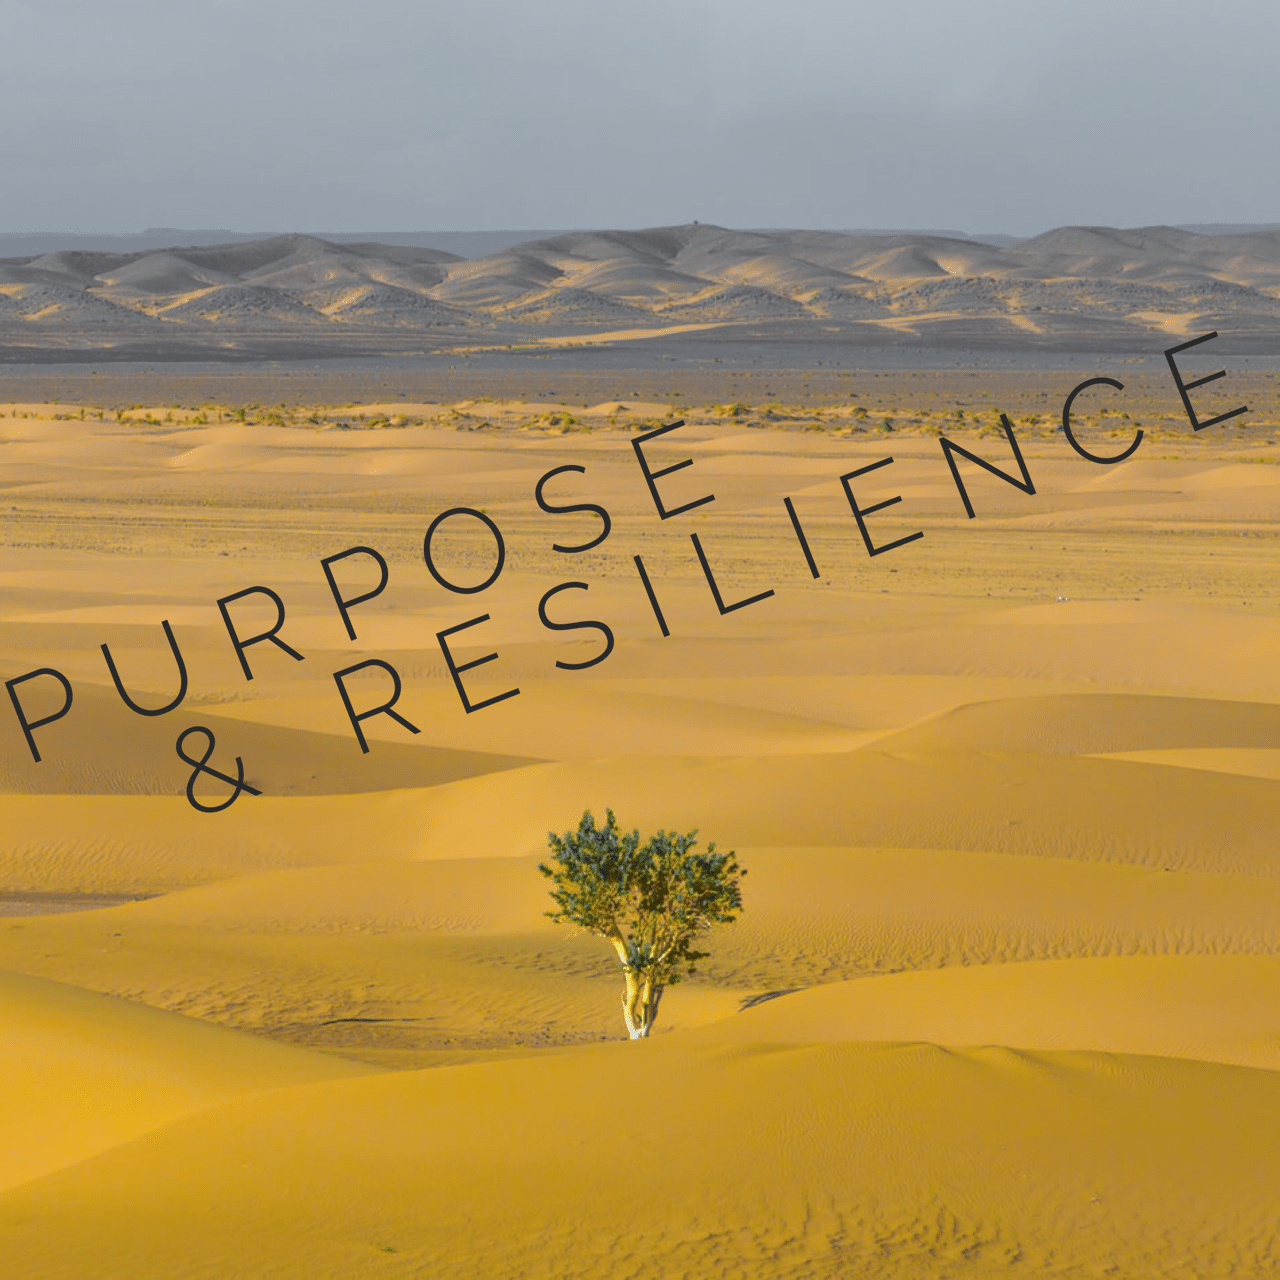 Purpose in Resilience by Janice Stone